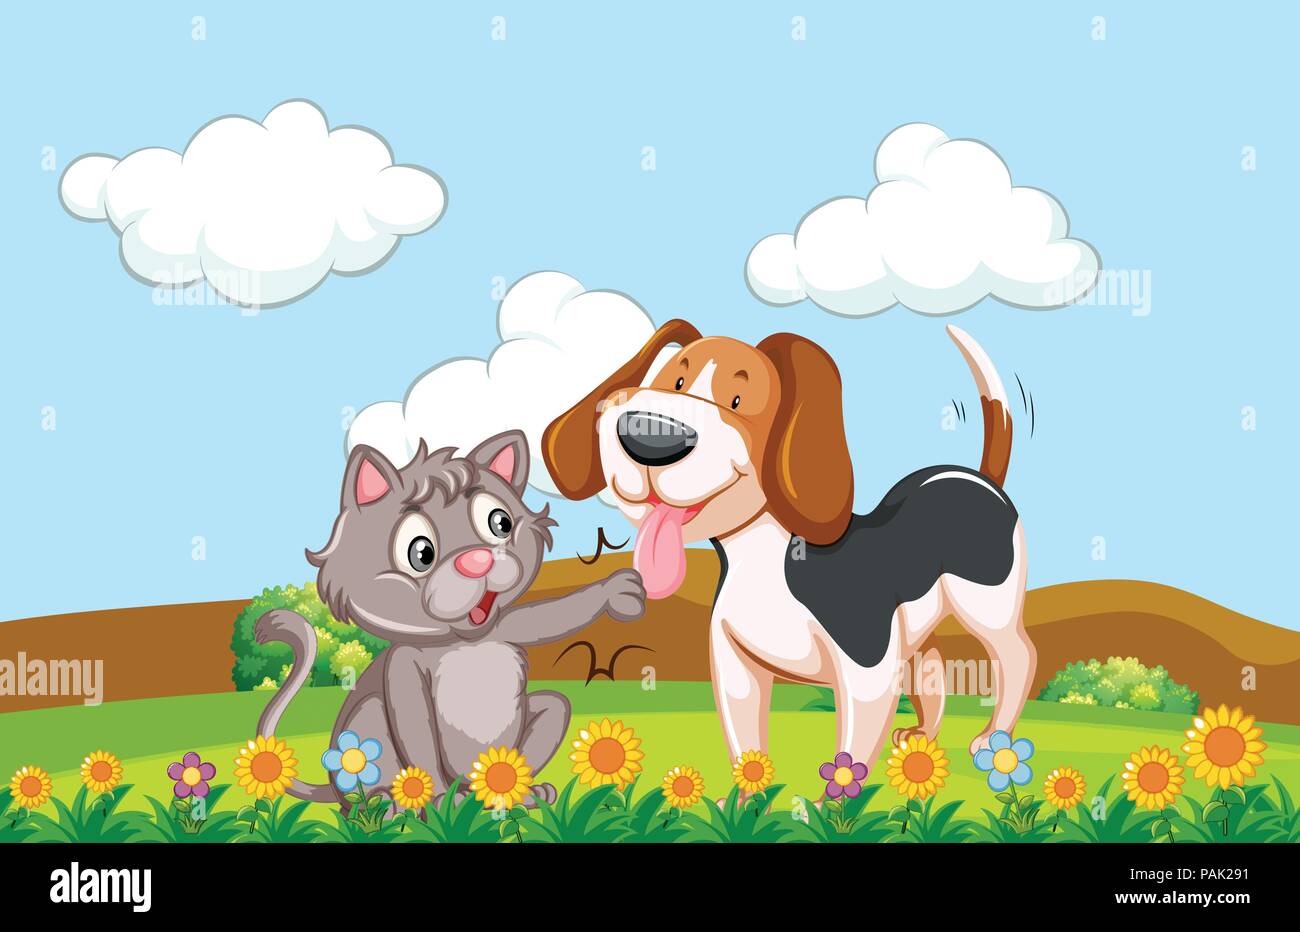 A dog and cat in a garden illustration Stock Vector